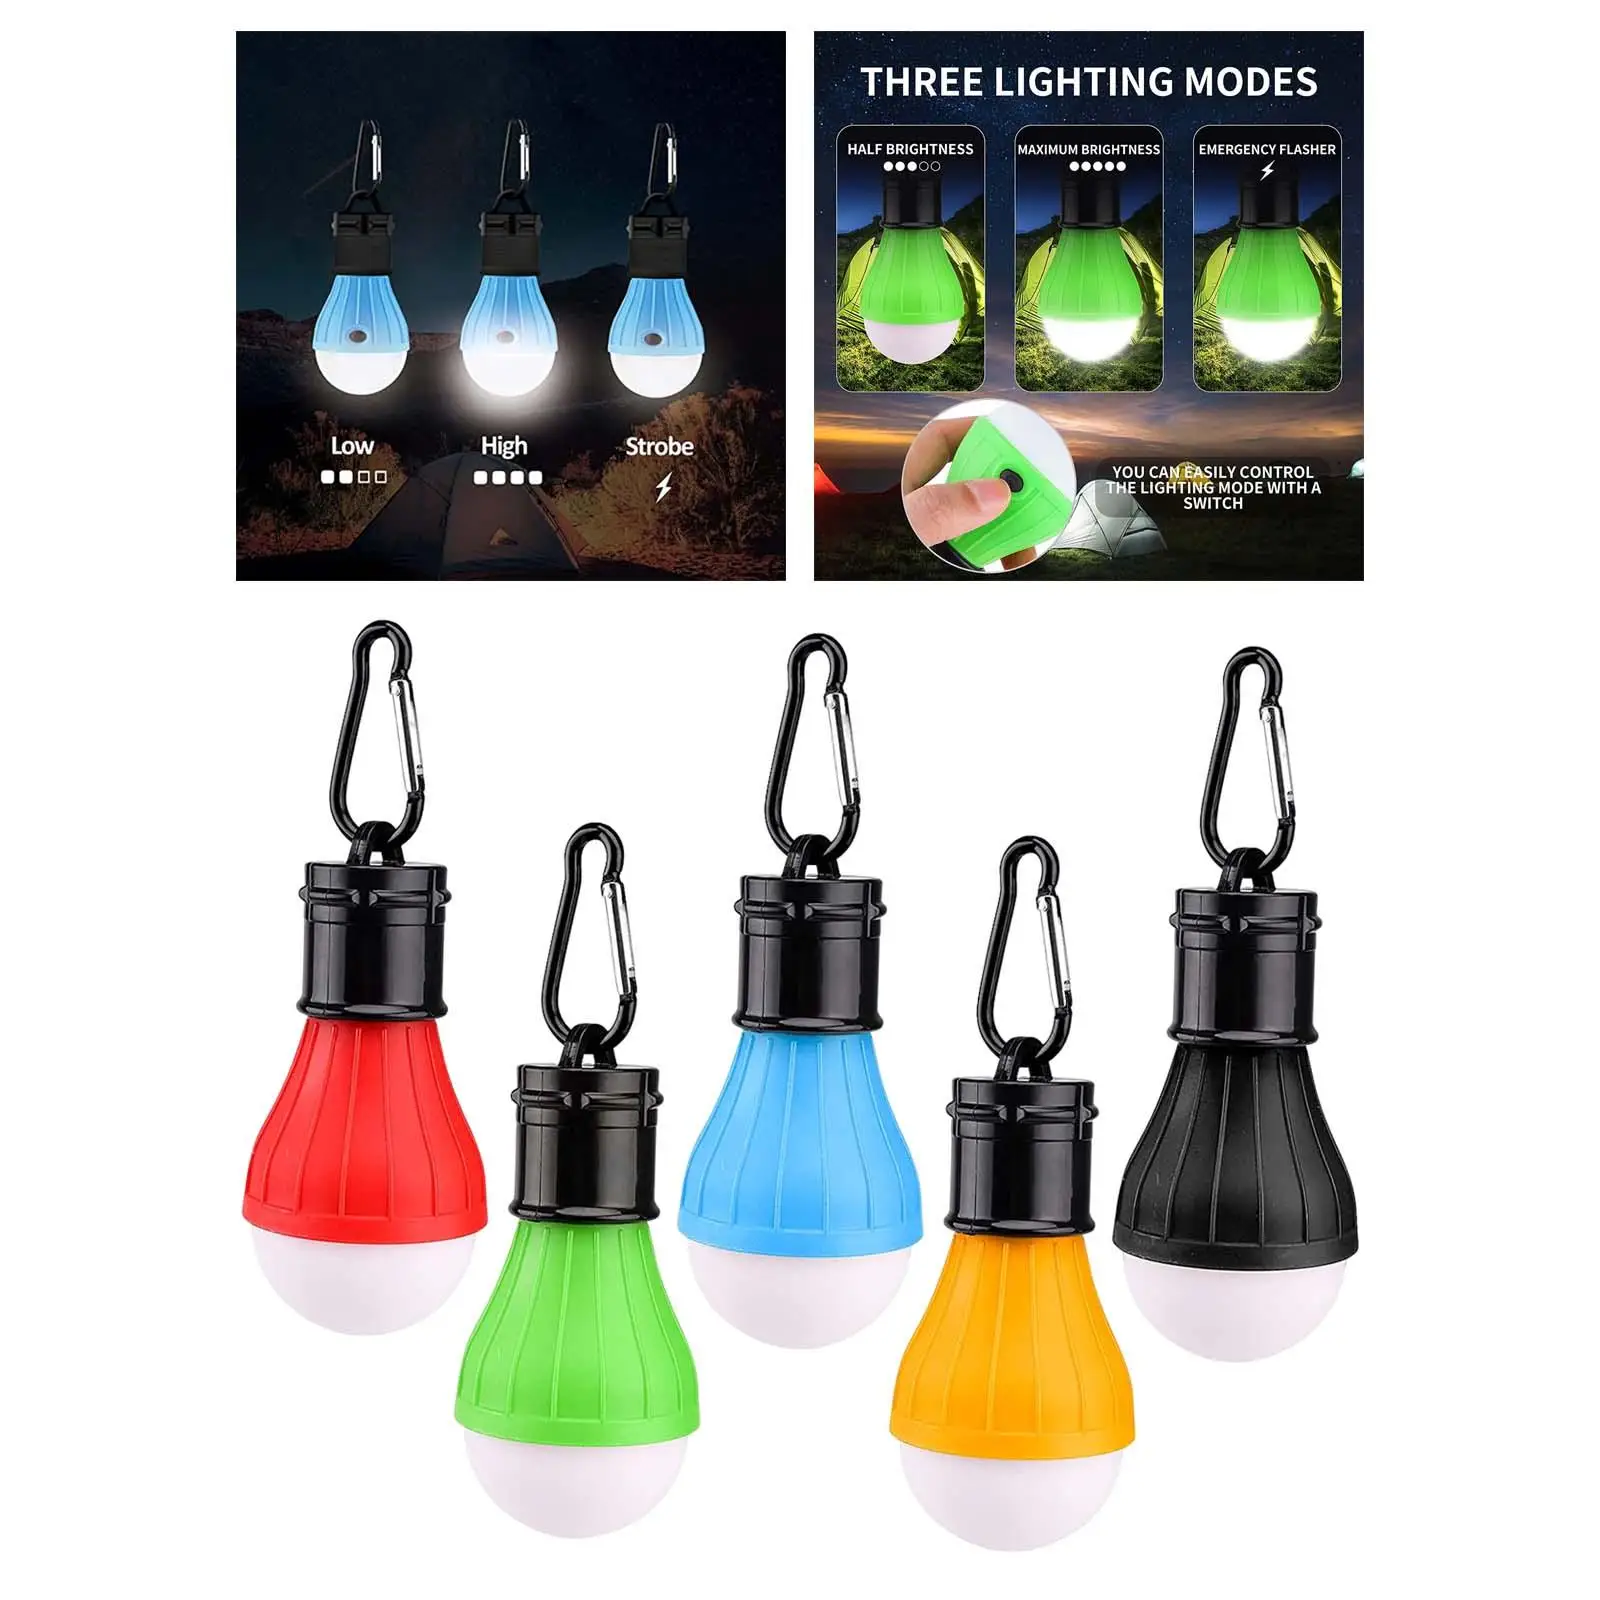 5x LED Camping Lantern Light Tent Lamp Waterproof Emergency 3 Modes Bulb for Indoor Car Repairing Outdoor Mountaineering